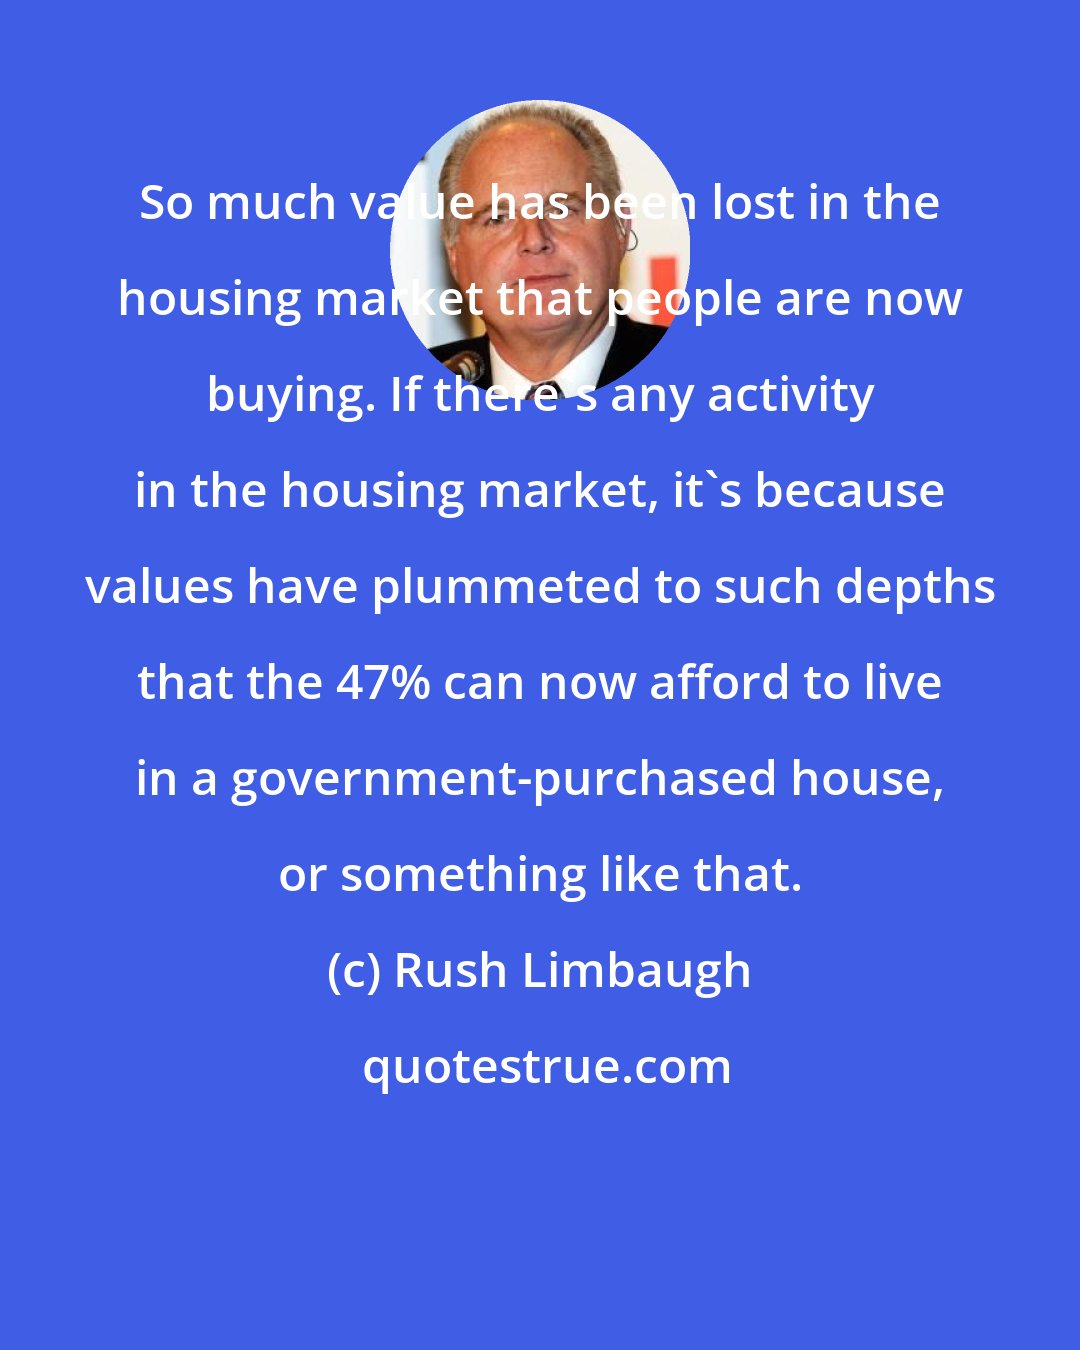 Rush Limbaugh: So much value has been lost in the housing market that people are now buying. If there's any activity in the housing market, it's because values have plummeted to such depths that the 47% can now afford to live in a government-purchased house, or something like that.